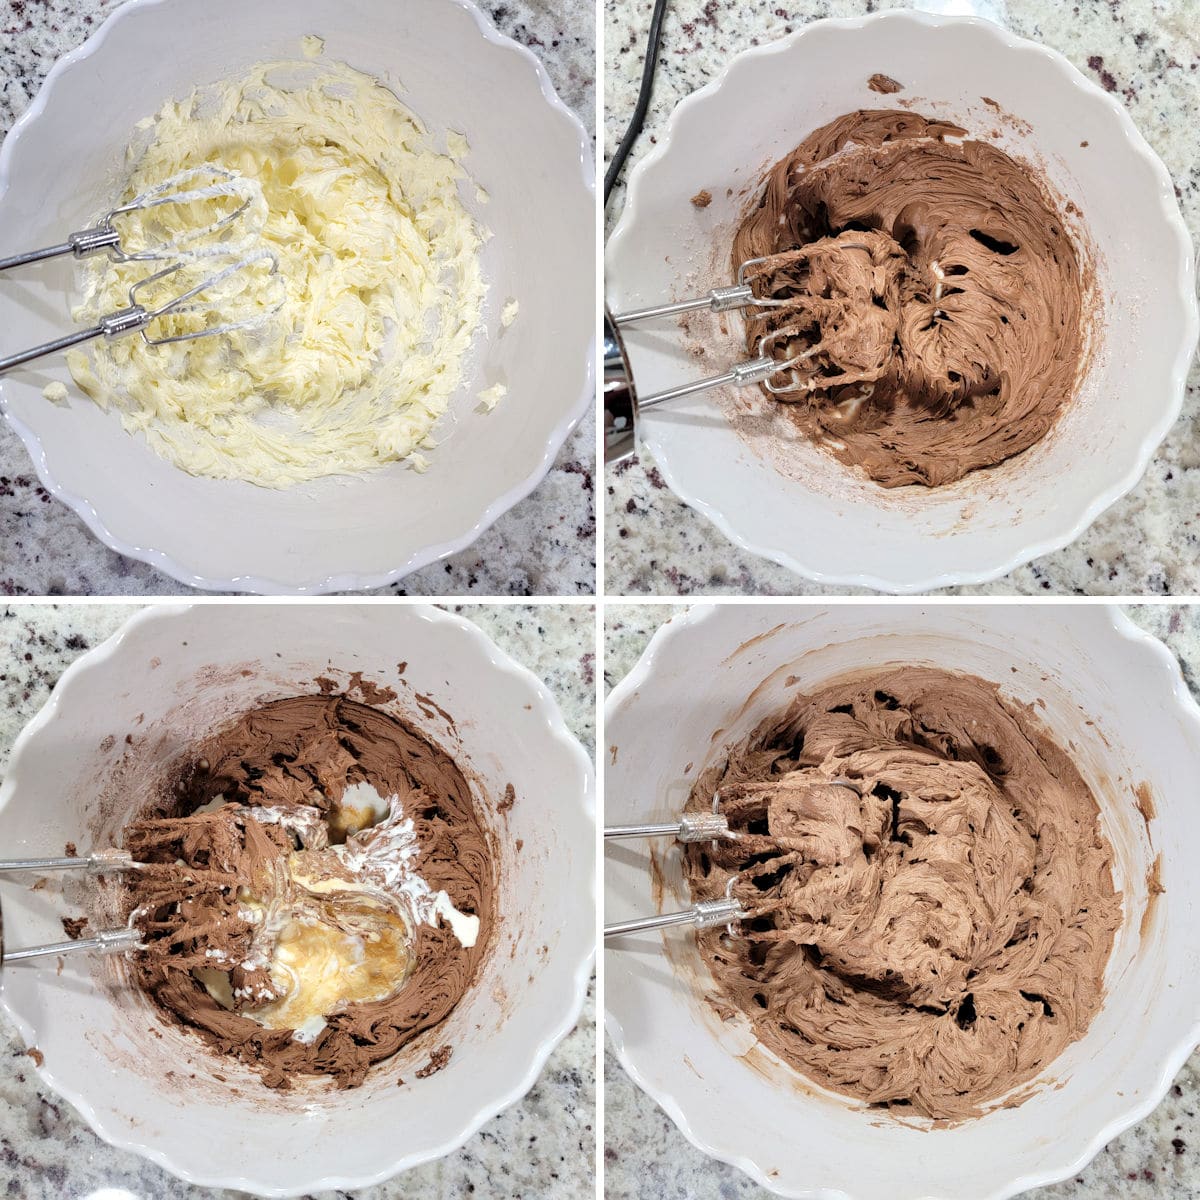 Mixing frosting ingredients into a scalloped white mixing bowl with a hand mixer.